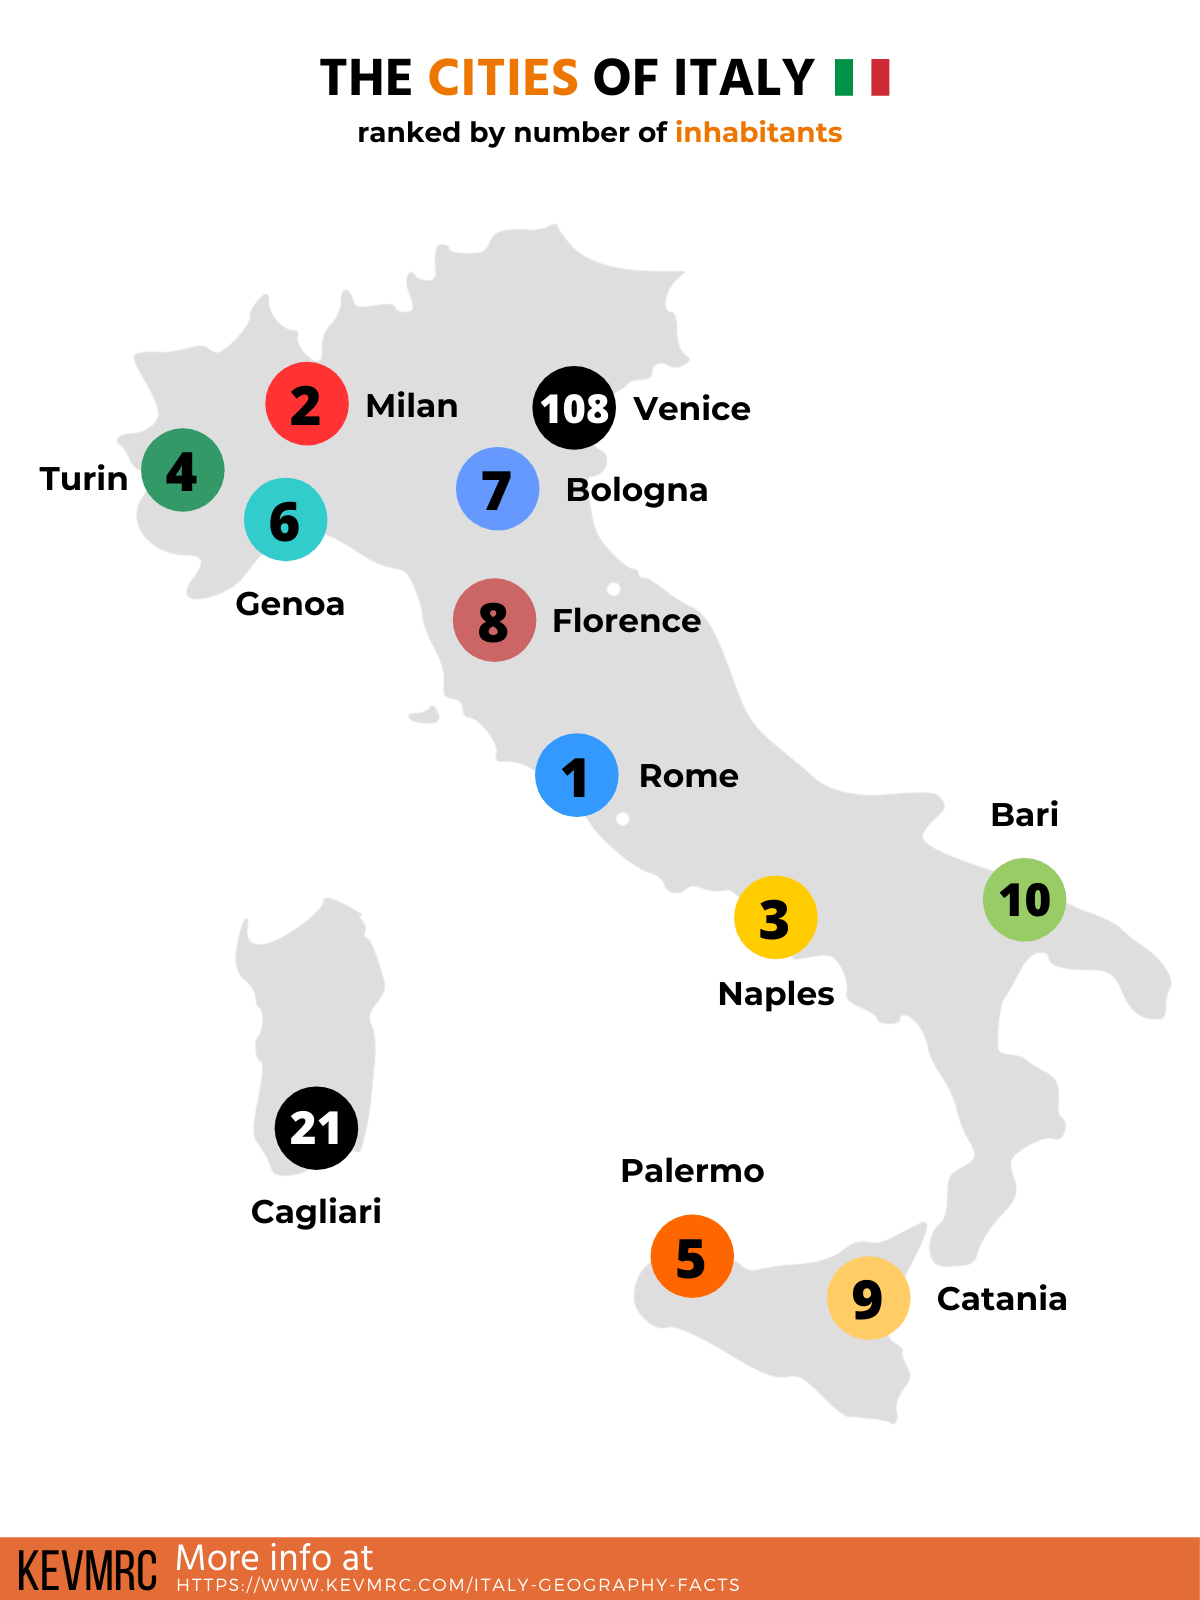 49 Interesting Geography of Italy Facts (+free infographic)